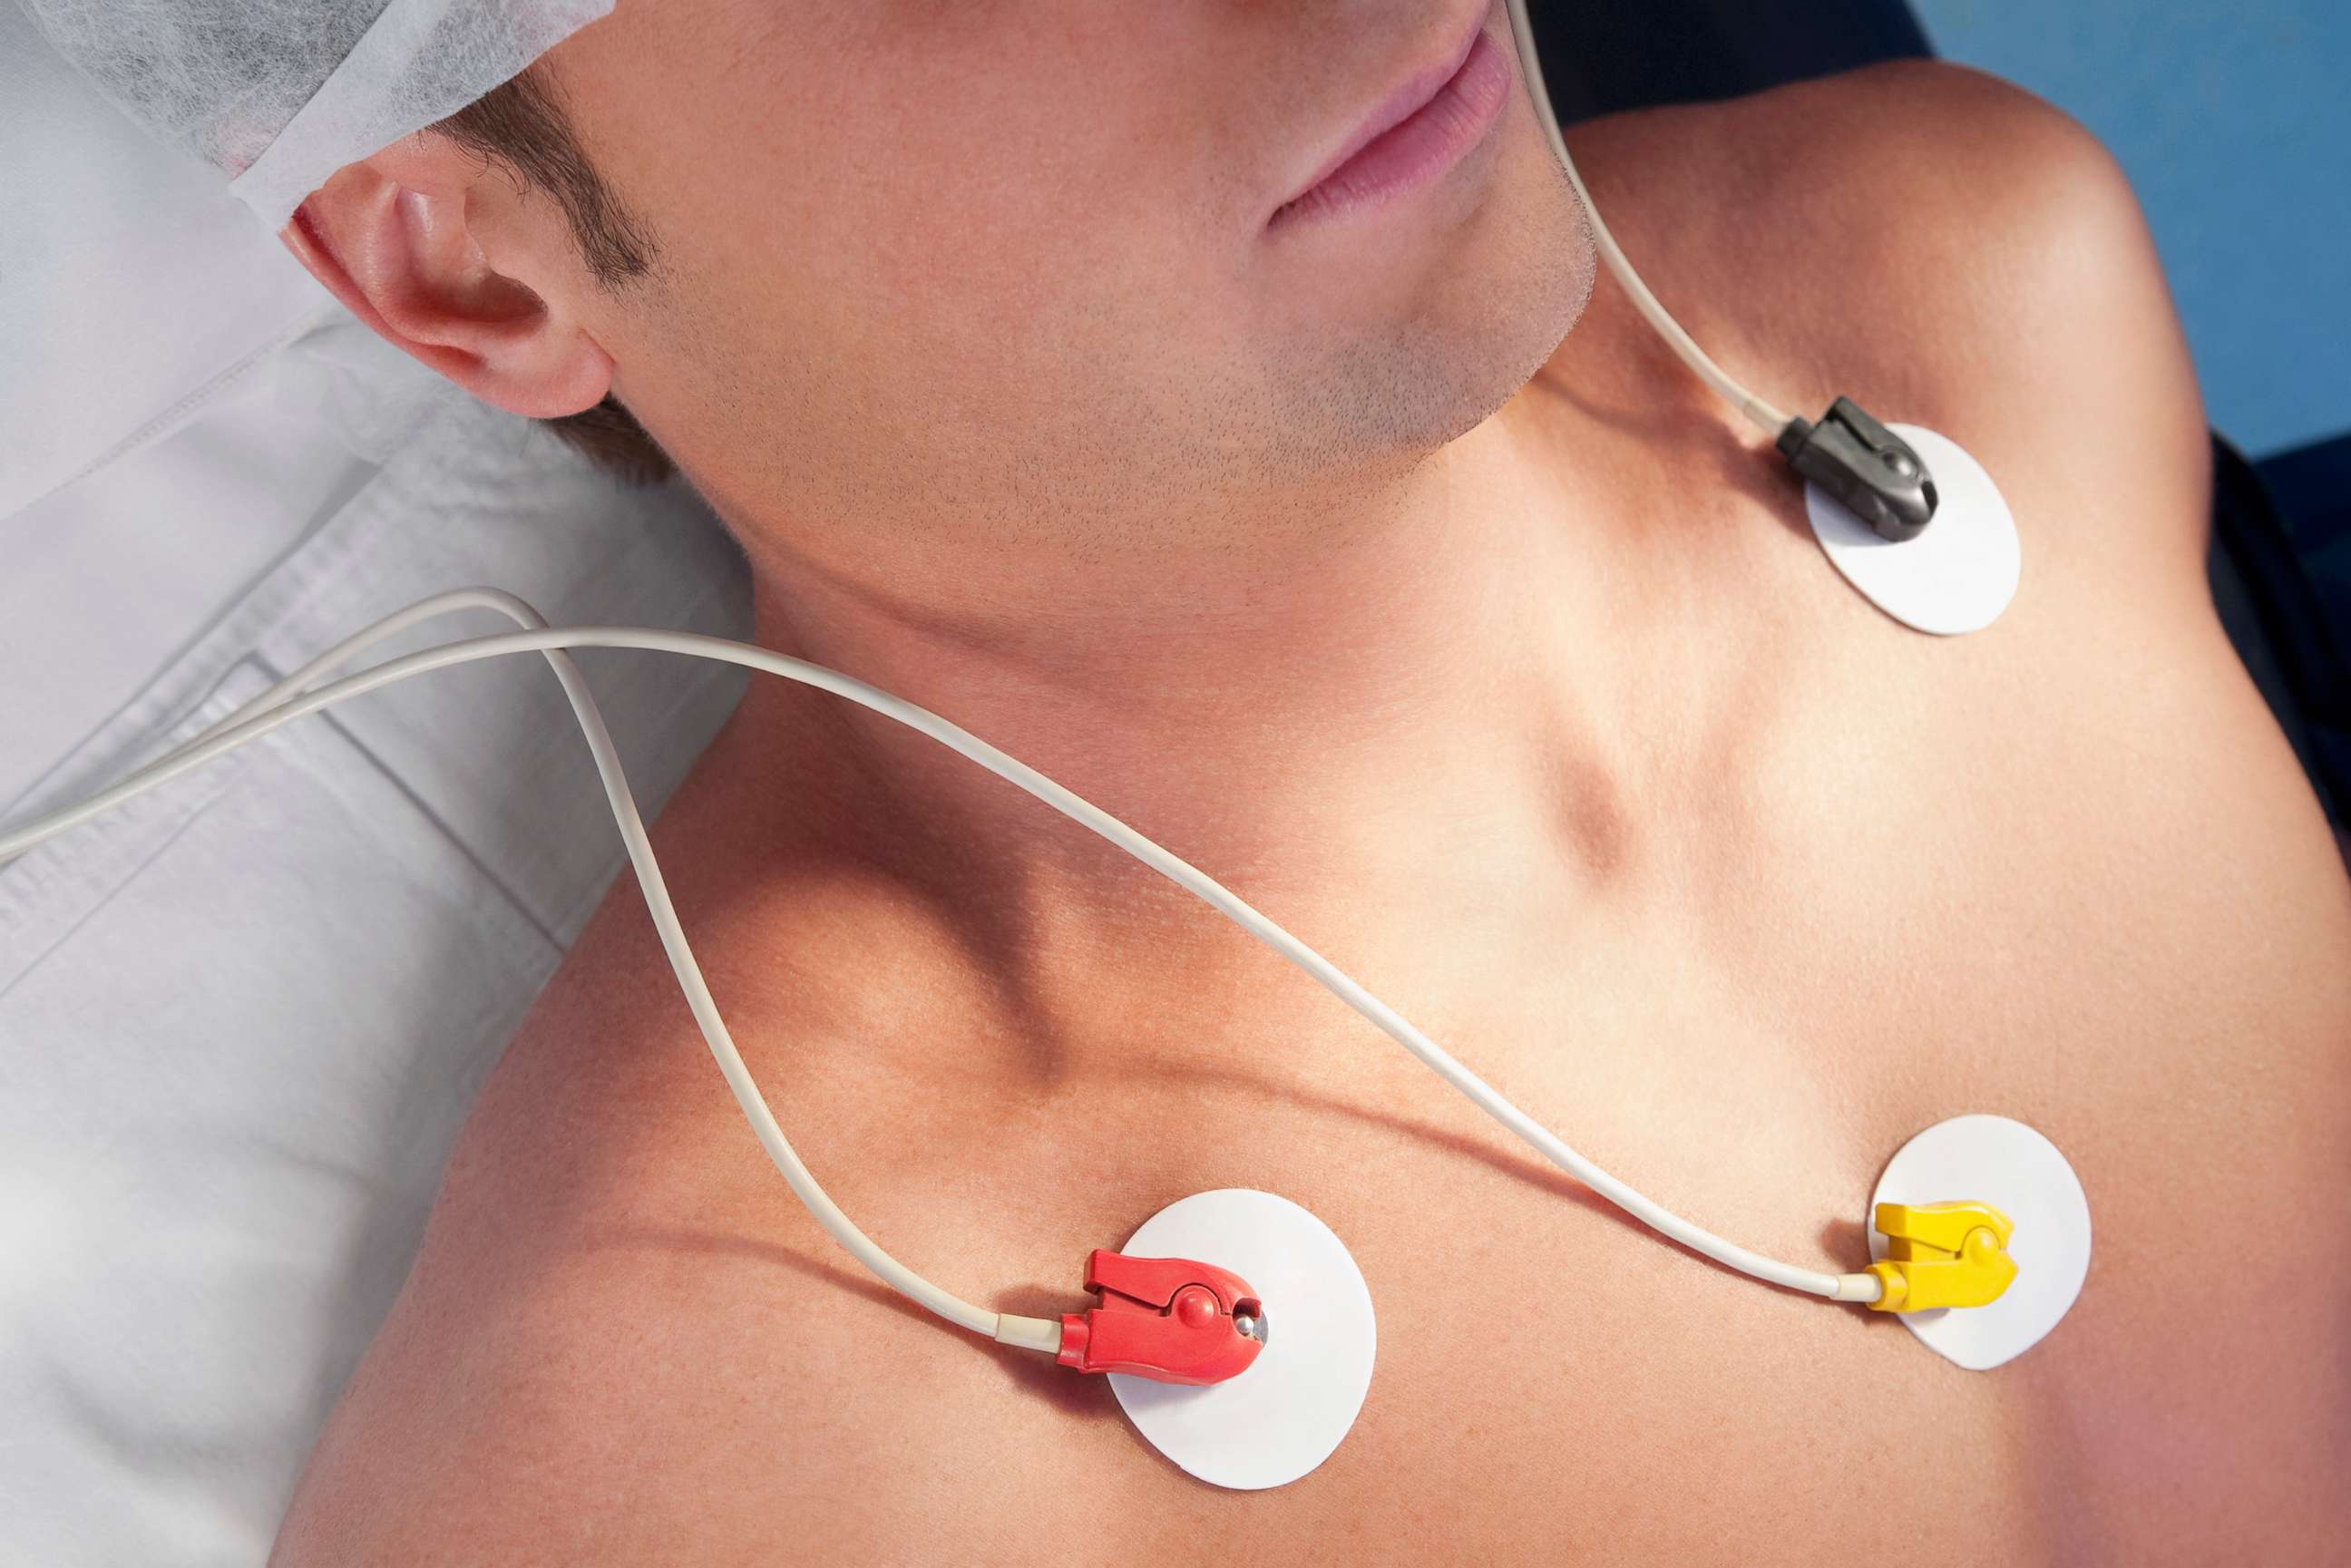 PHOTO: A person appears to take an electrocardiogram test in this stock photo.